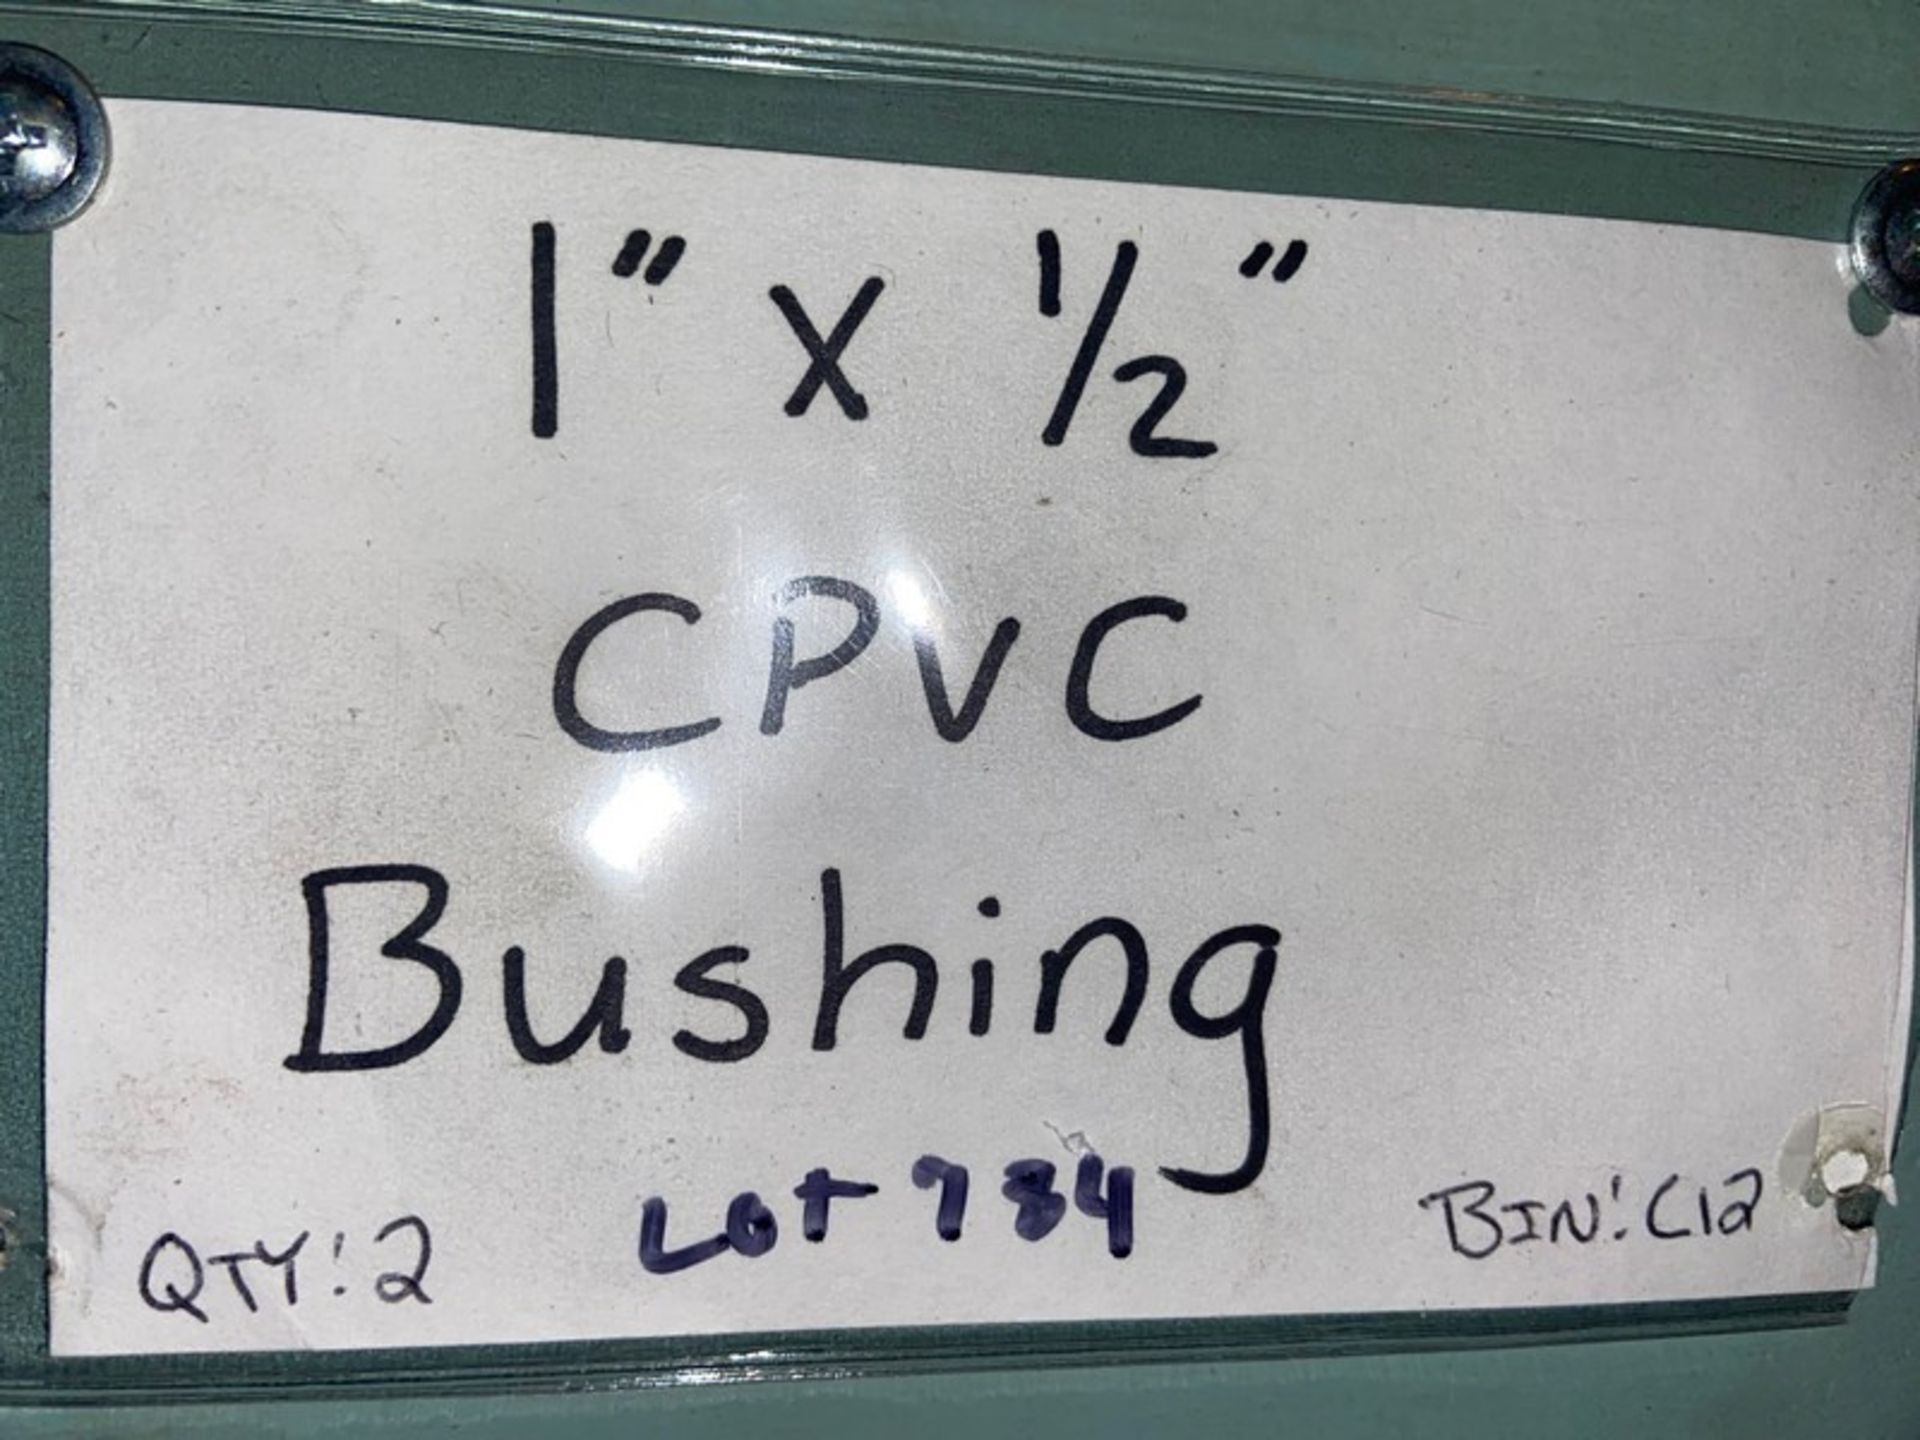 (79) 1”x 3/4” CPVC Bushing (C:13) (LOCATED IN MONROEVILLE, PA) - Image 3 of 4